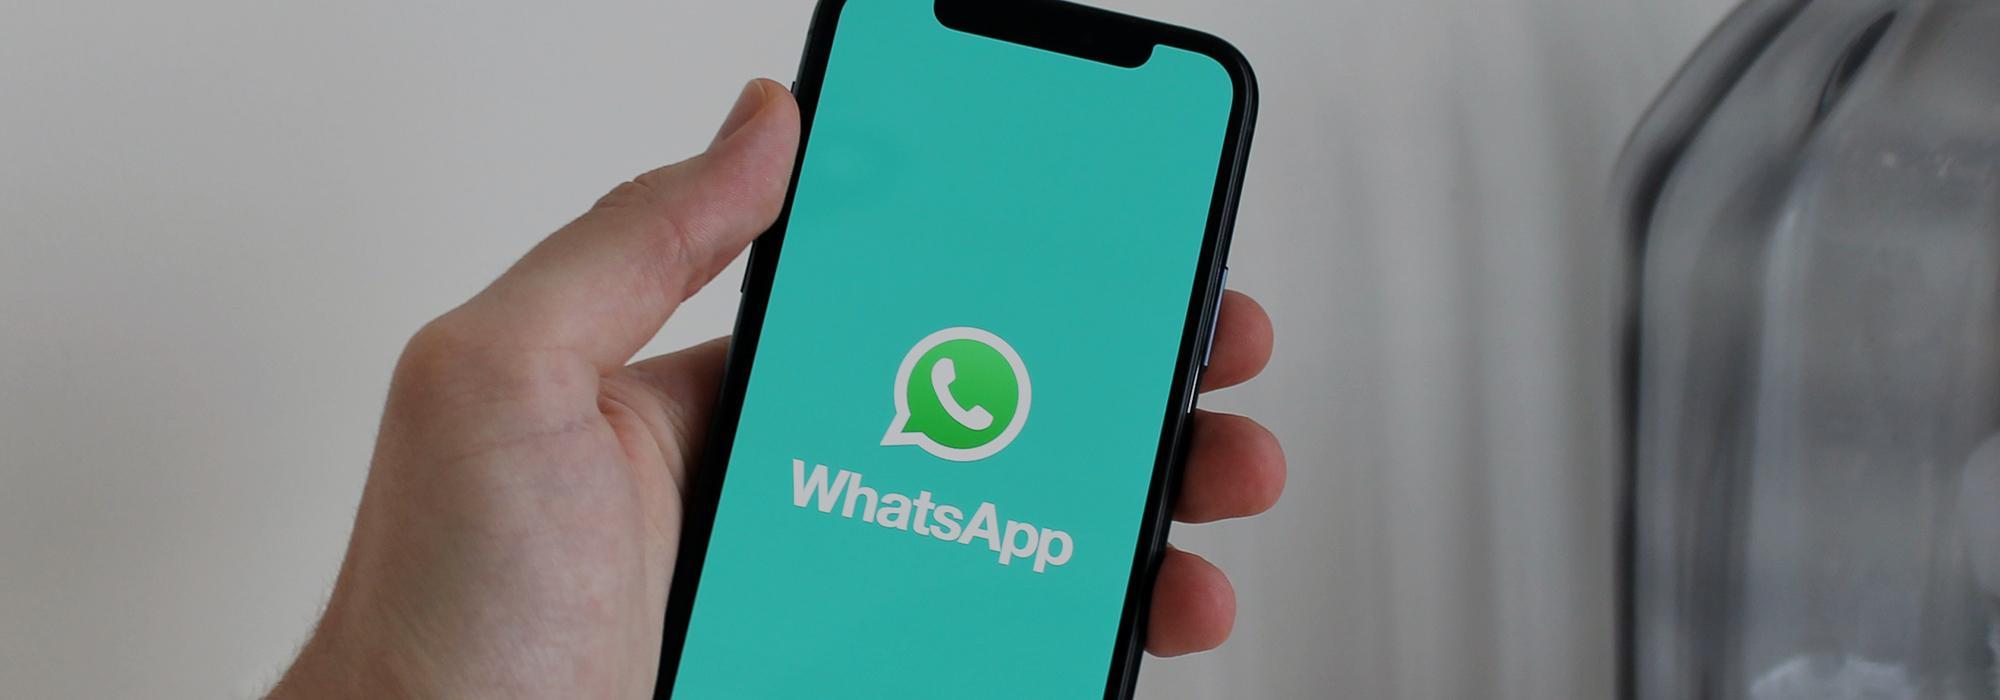 Beware Of Scam WhatsApp Messages Impersonating Our Employees